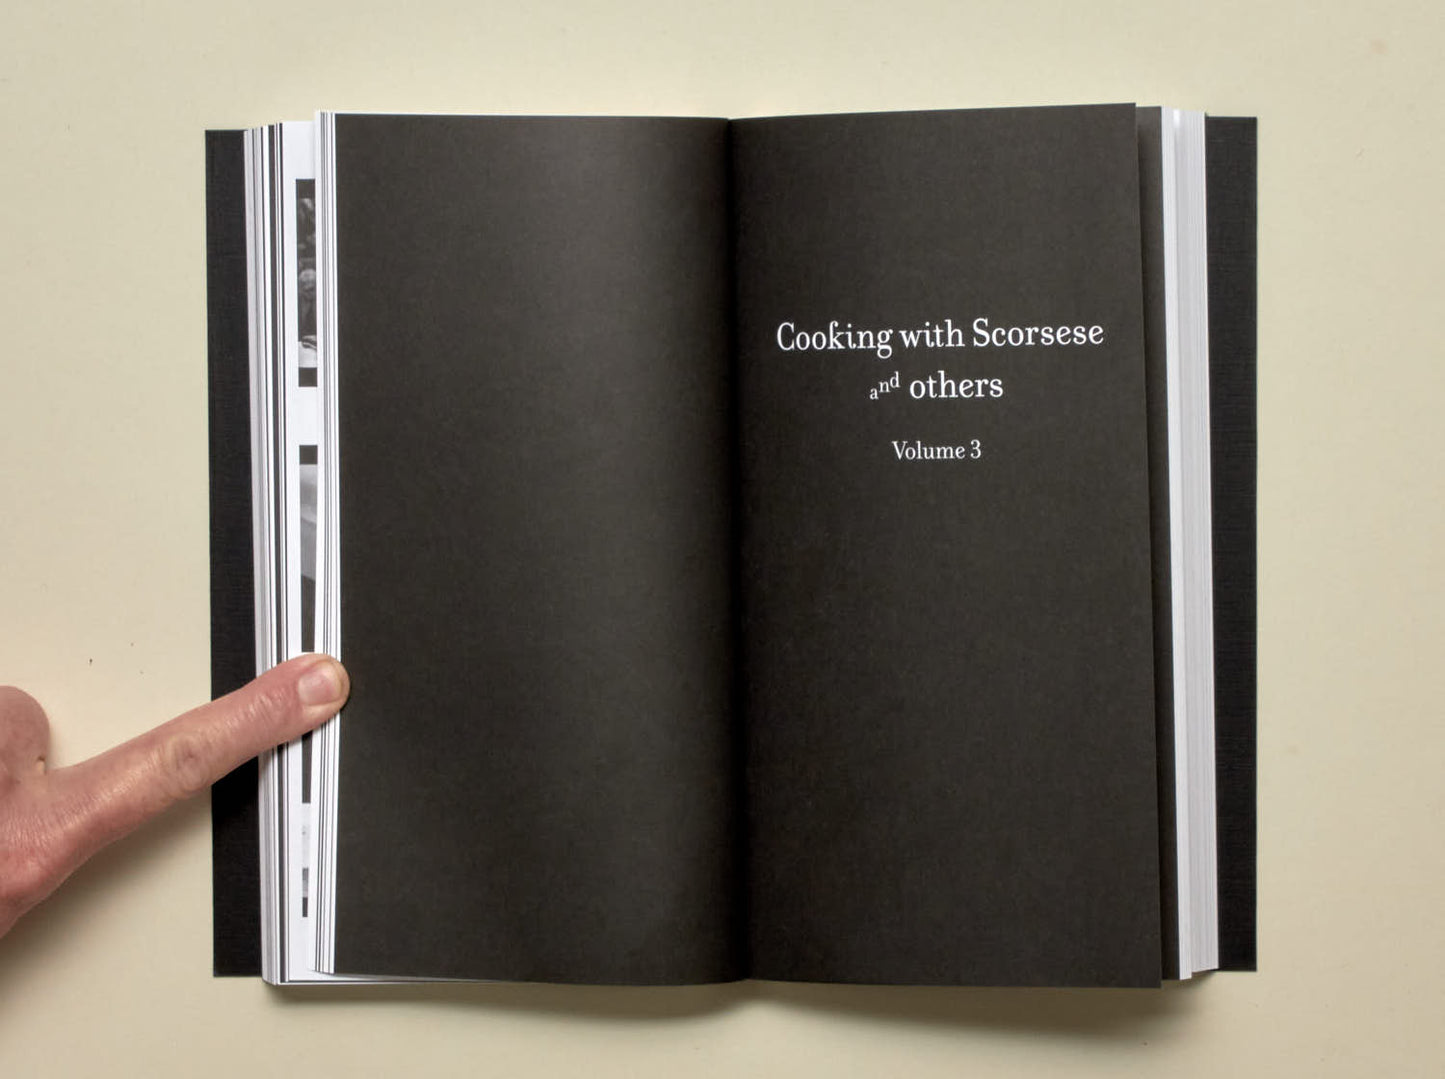 Cooking with Scorsese: The Collection